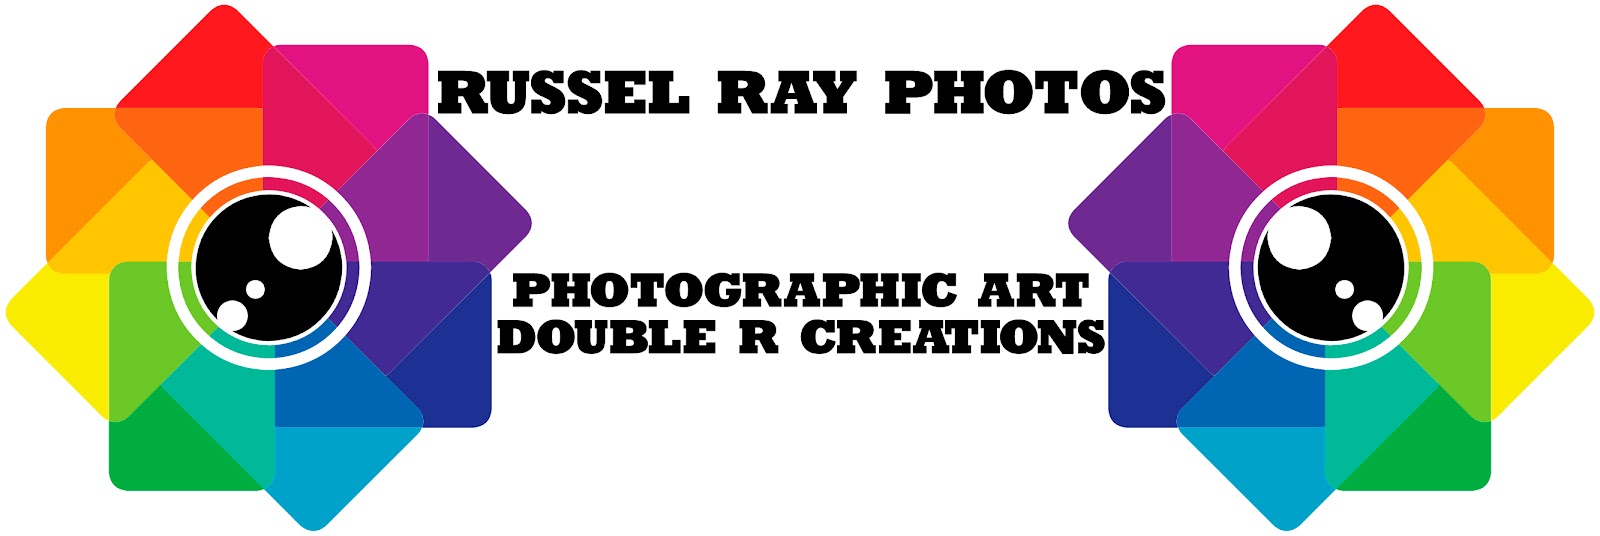 Russel Ray Photos